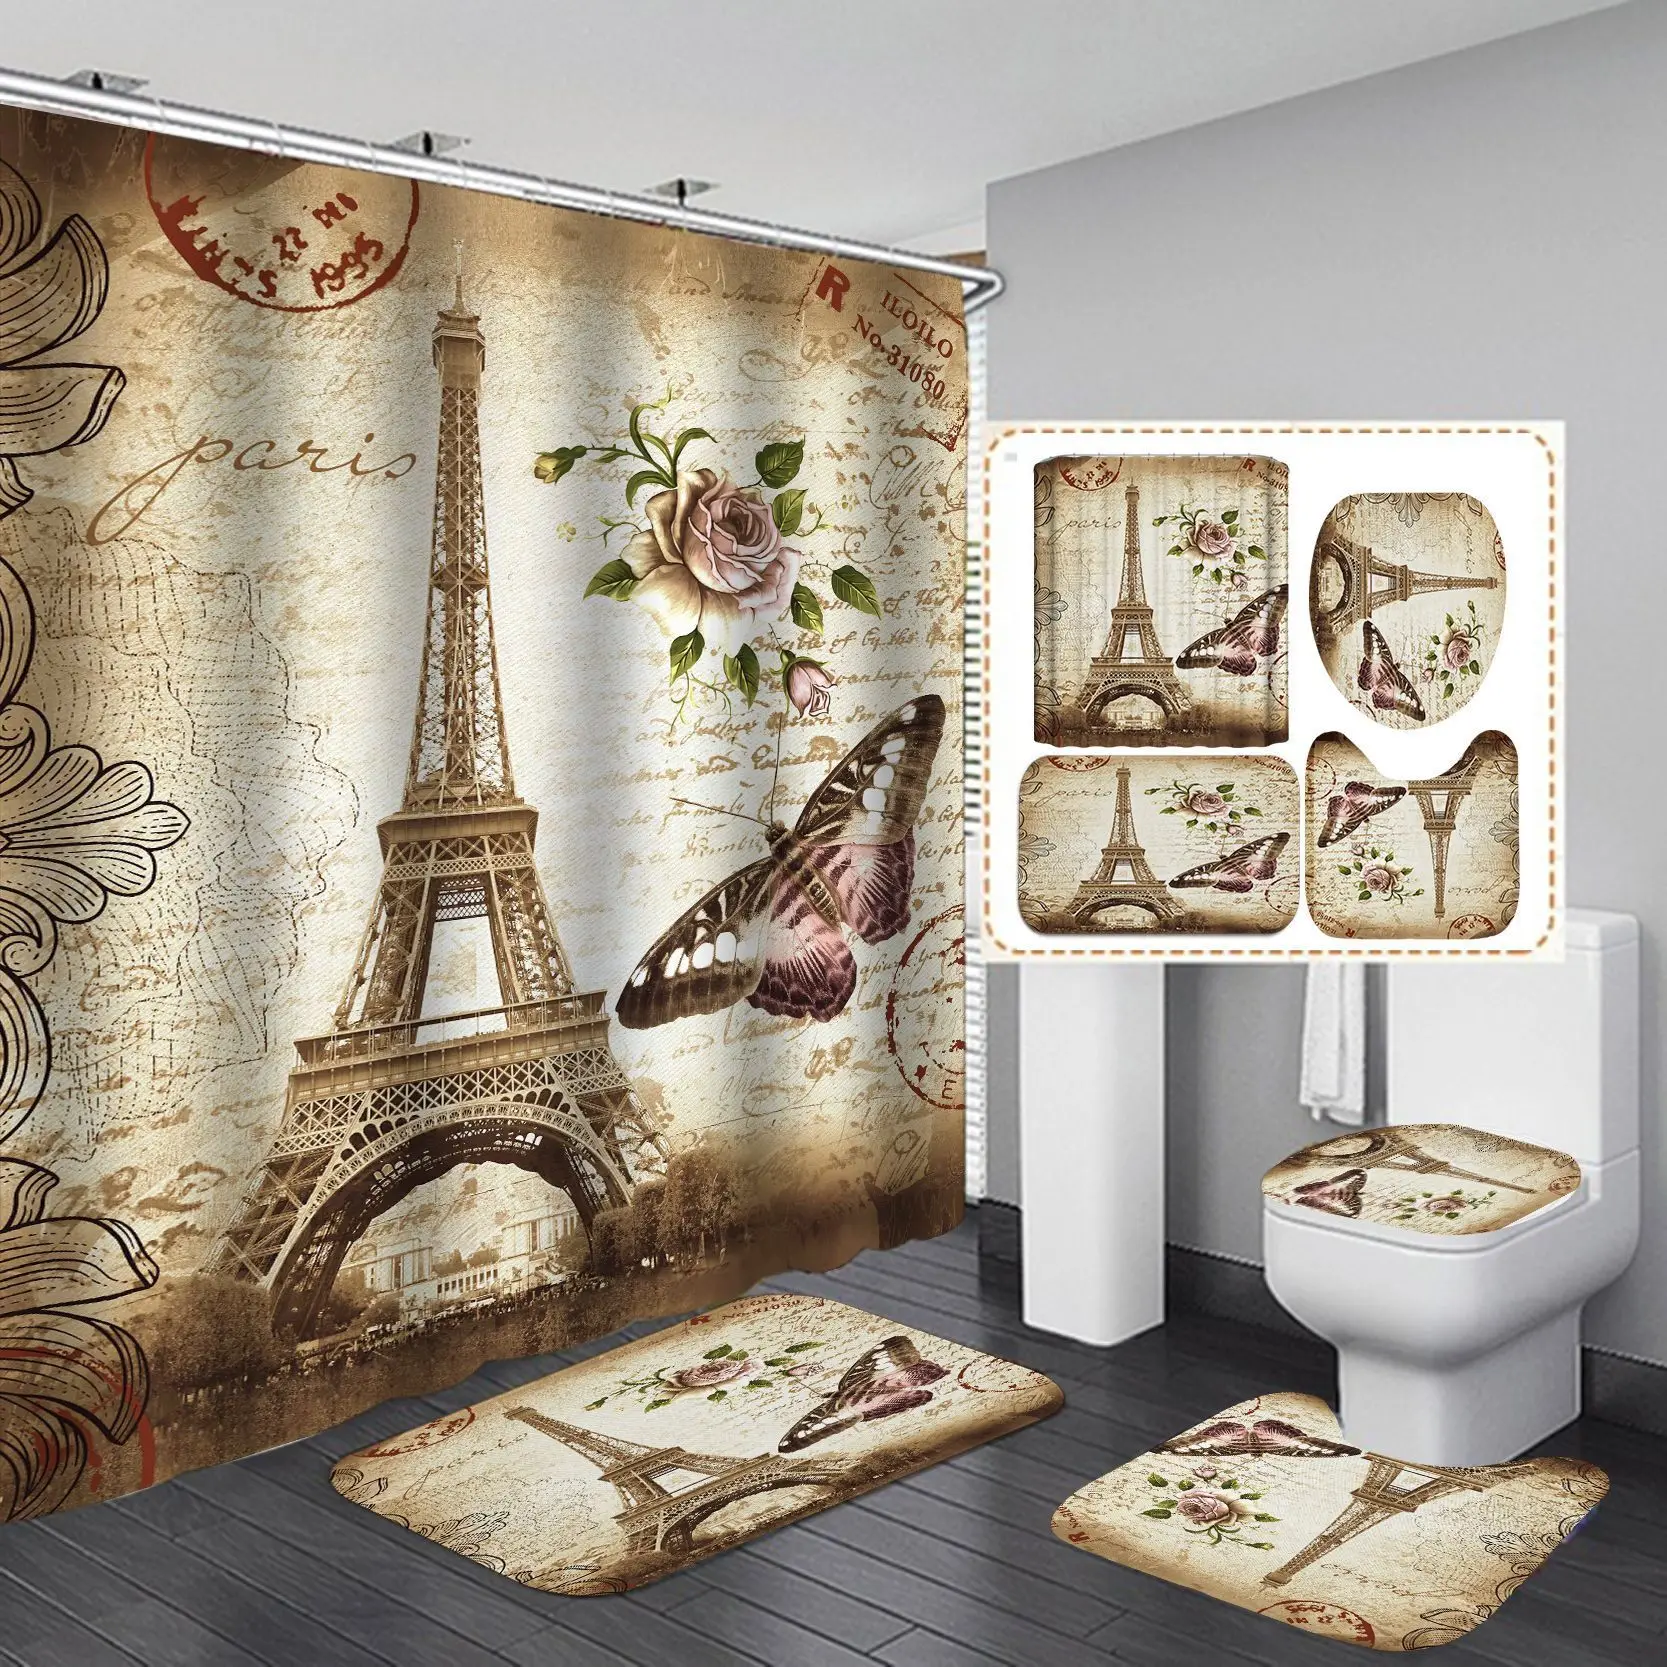 
Fashionable custom 3D printed shpwer curtain waterproof polyester fabric shower curtain sets 